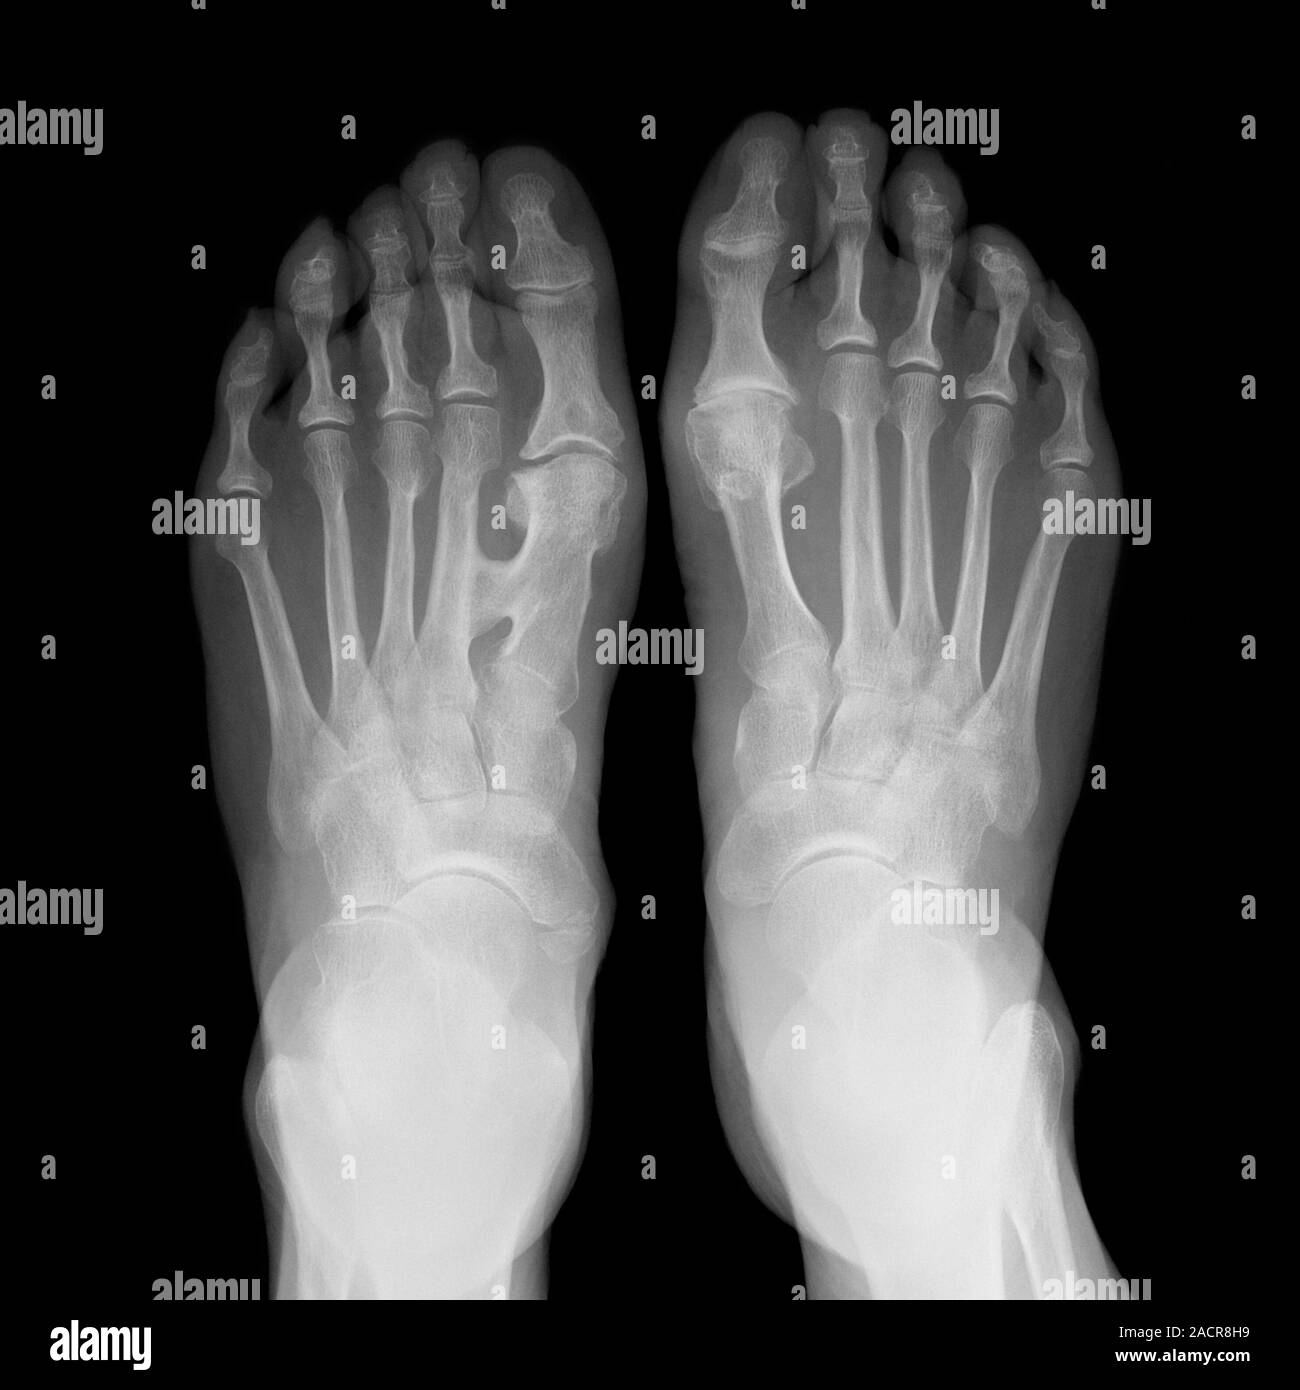 Fused metatarsals. X-ray of the feet of a 73 year old female patient ...